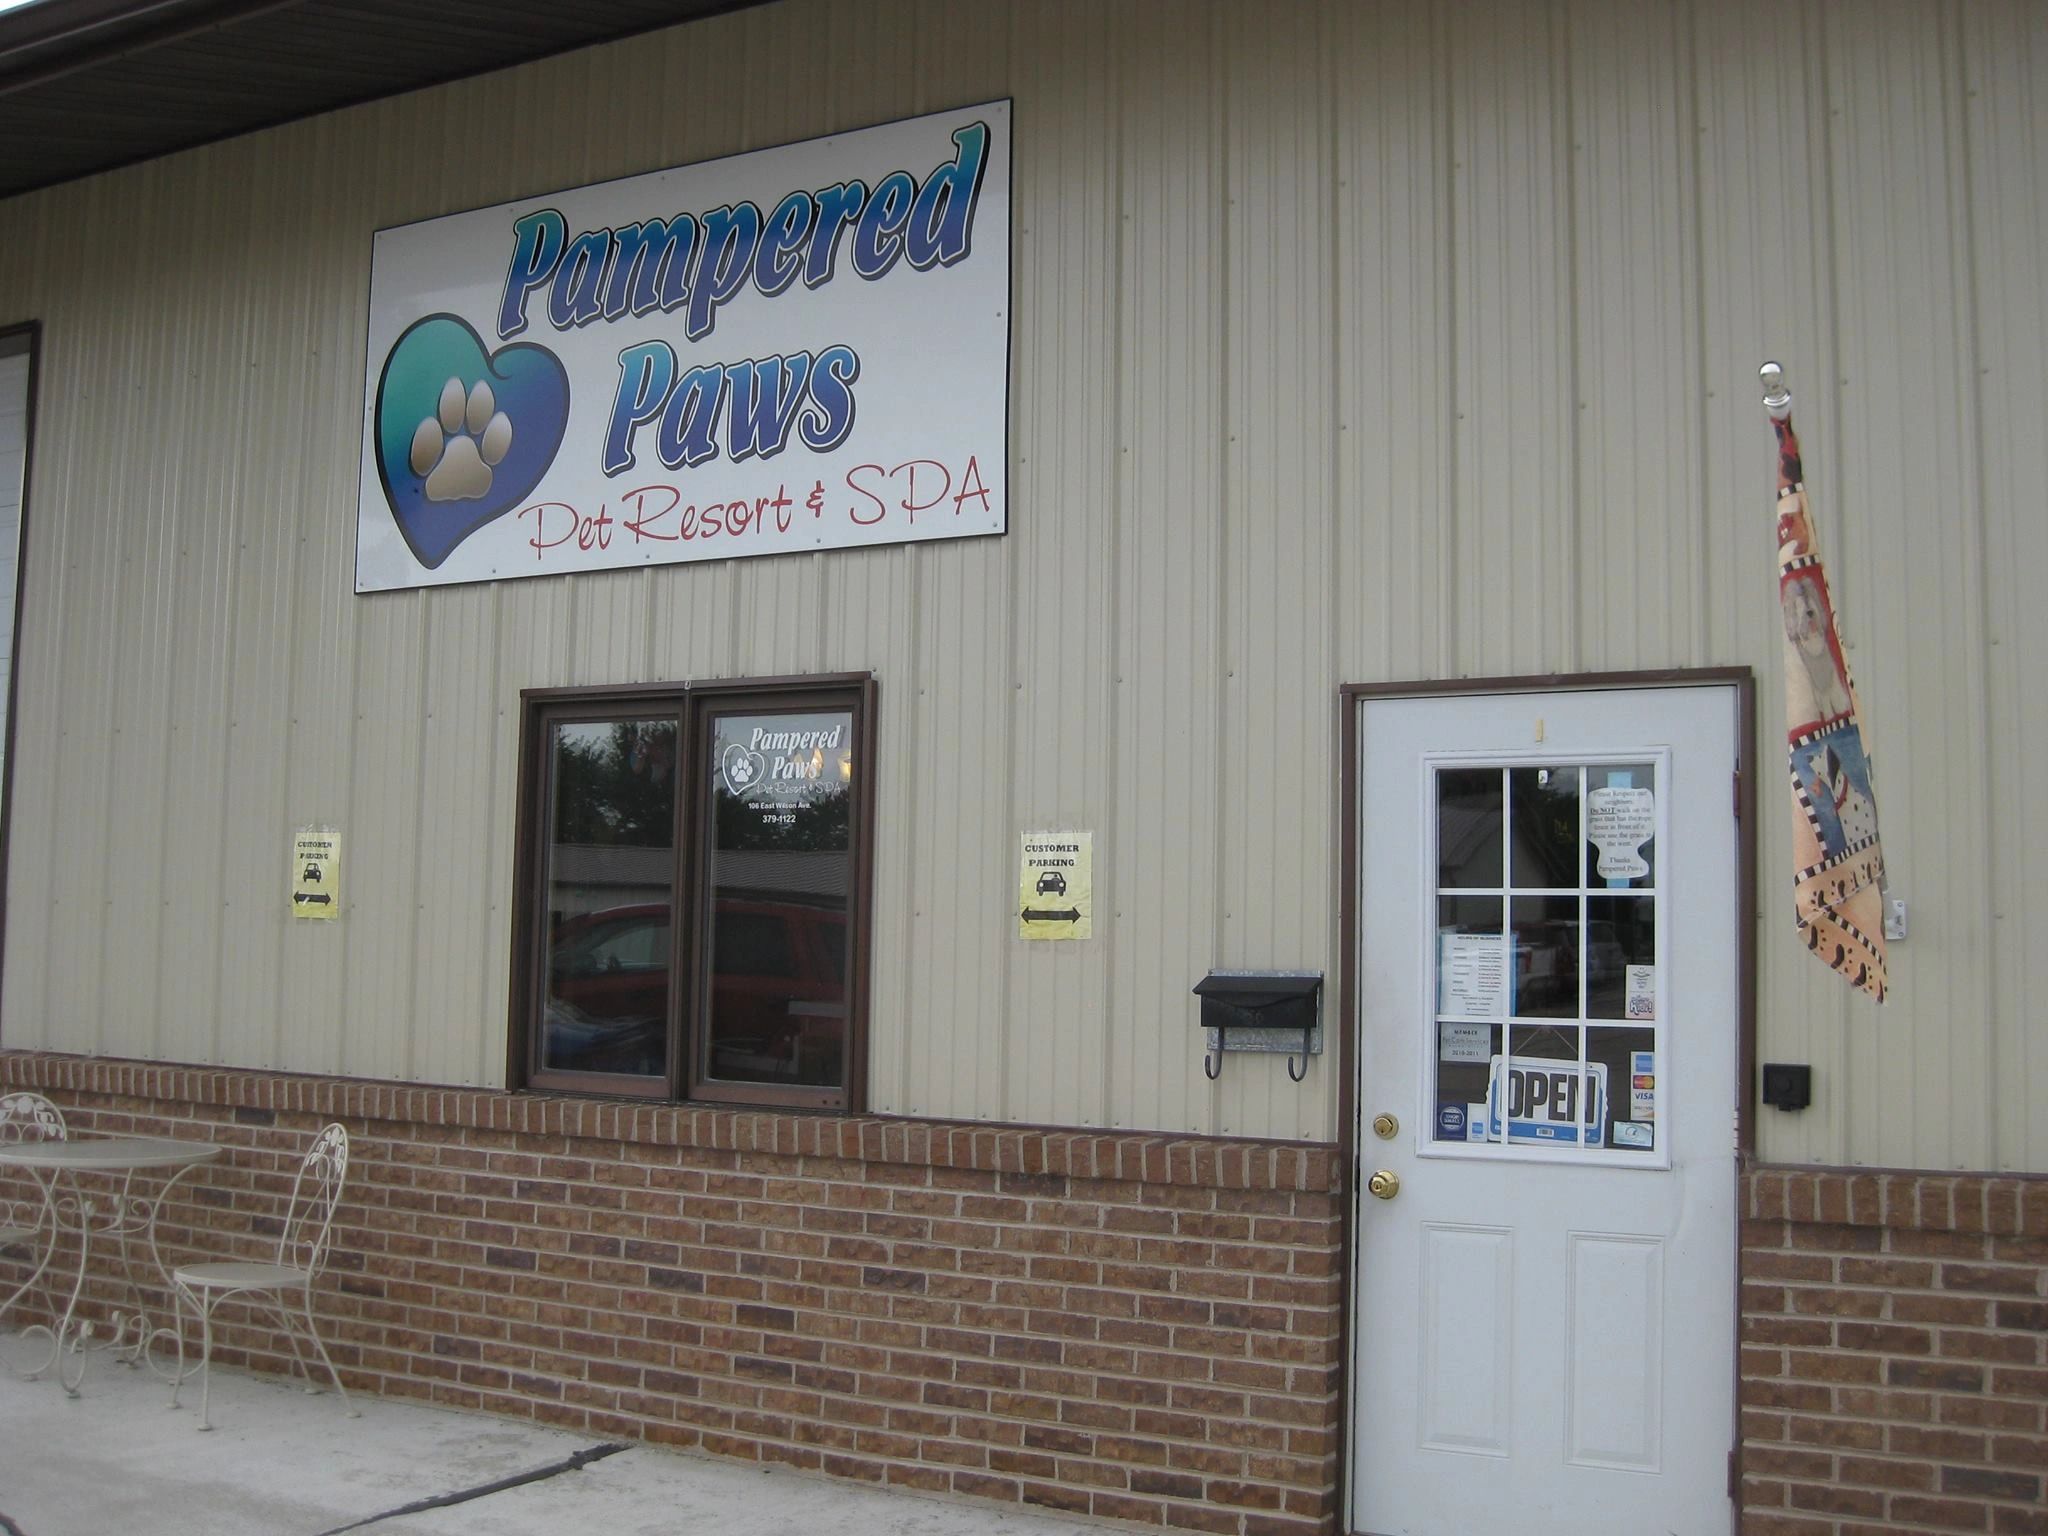 Pampered Paws Pet Resort and Spa